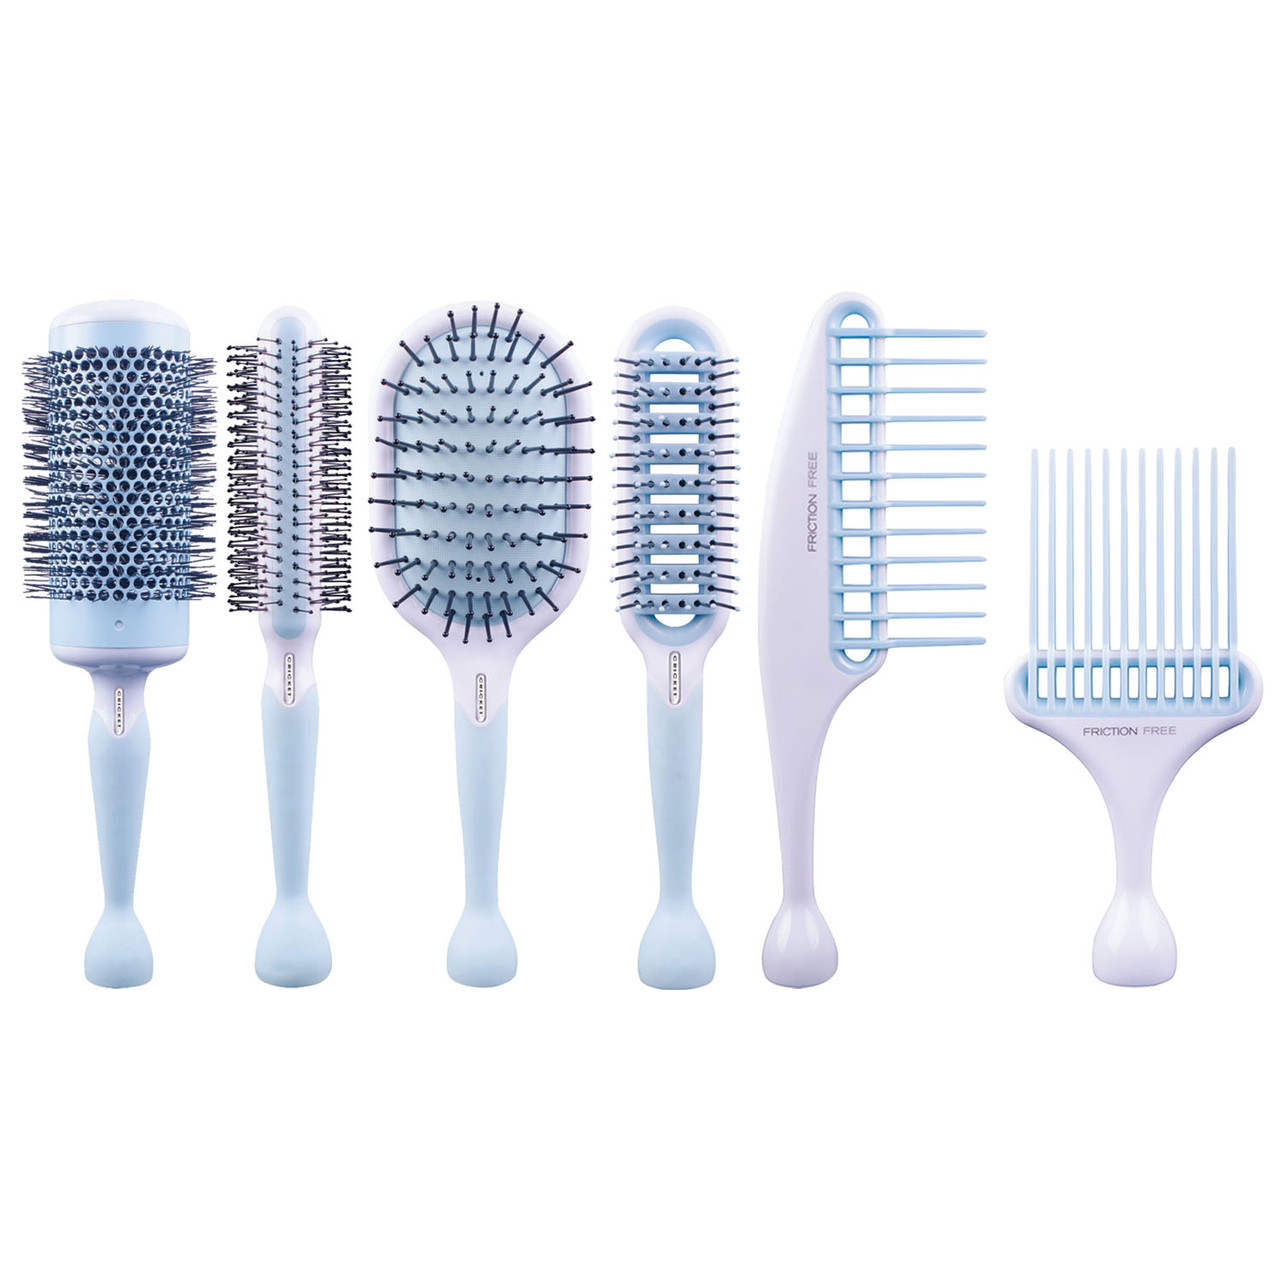 How I use Ship-Shape to clean my combs, brushes, and other hair tools 